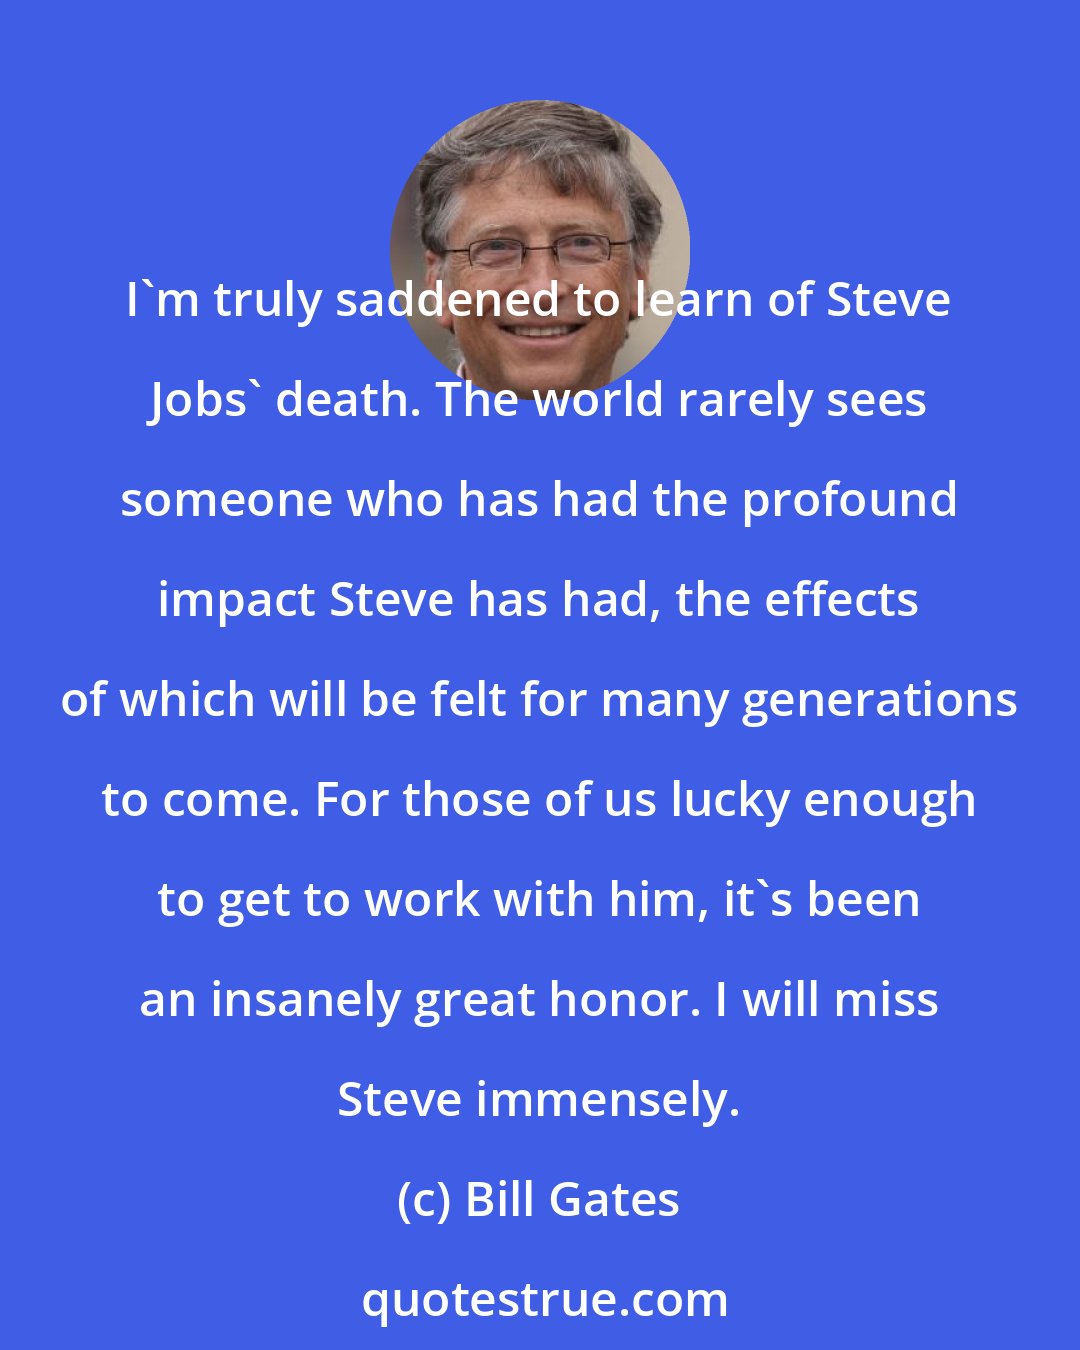 Bill Gates: I'm truly saddened to learn of Steve Jobs' death. The world rarely sees someone who has had the profound impact Steve has had, the effects of which will be felt for many generations to come. For those of us lucky enough to get to work with him, it's been an insanely great honor. I will miss Steve immensely.